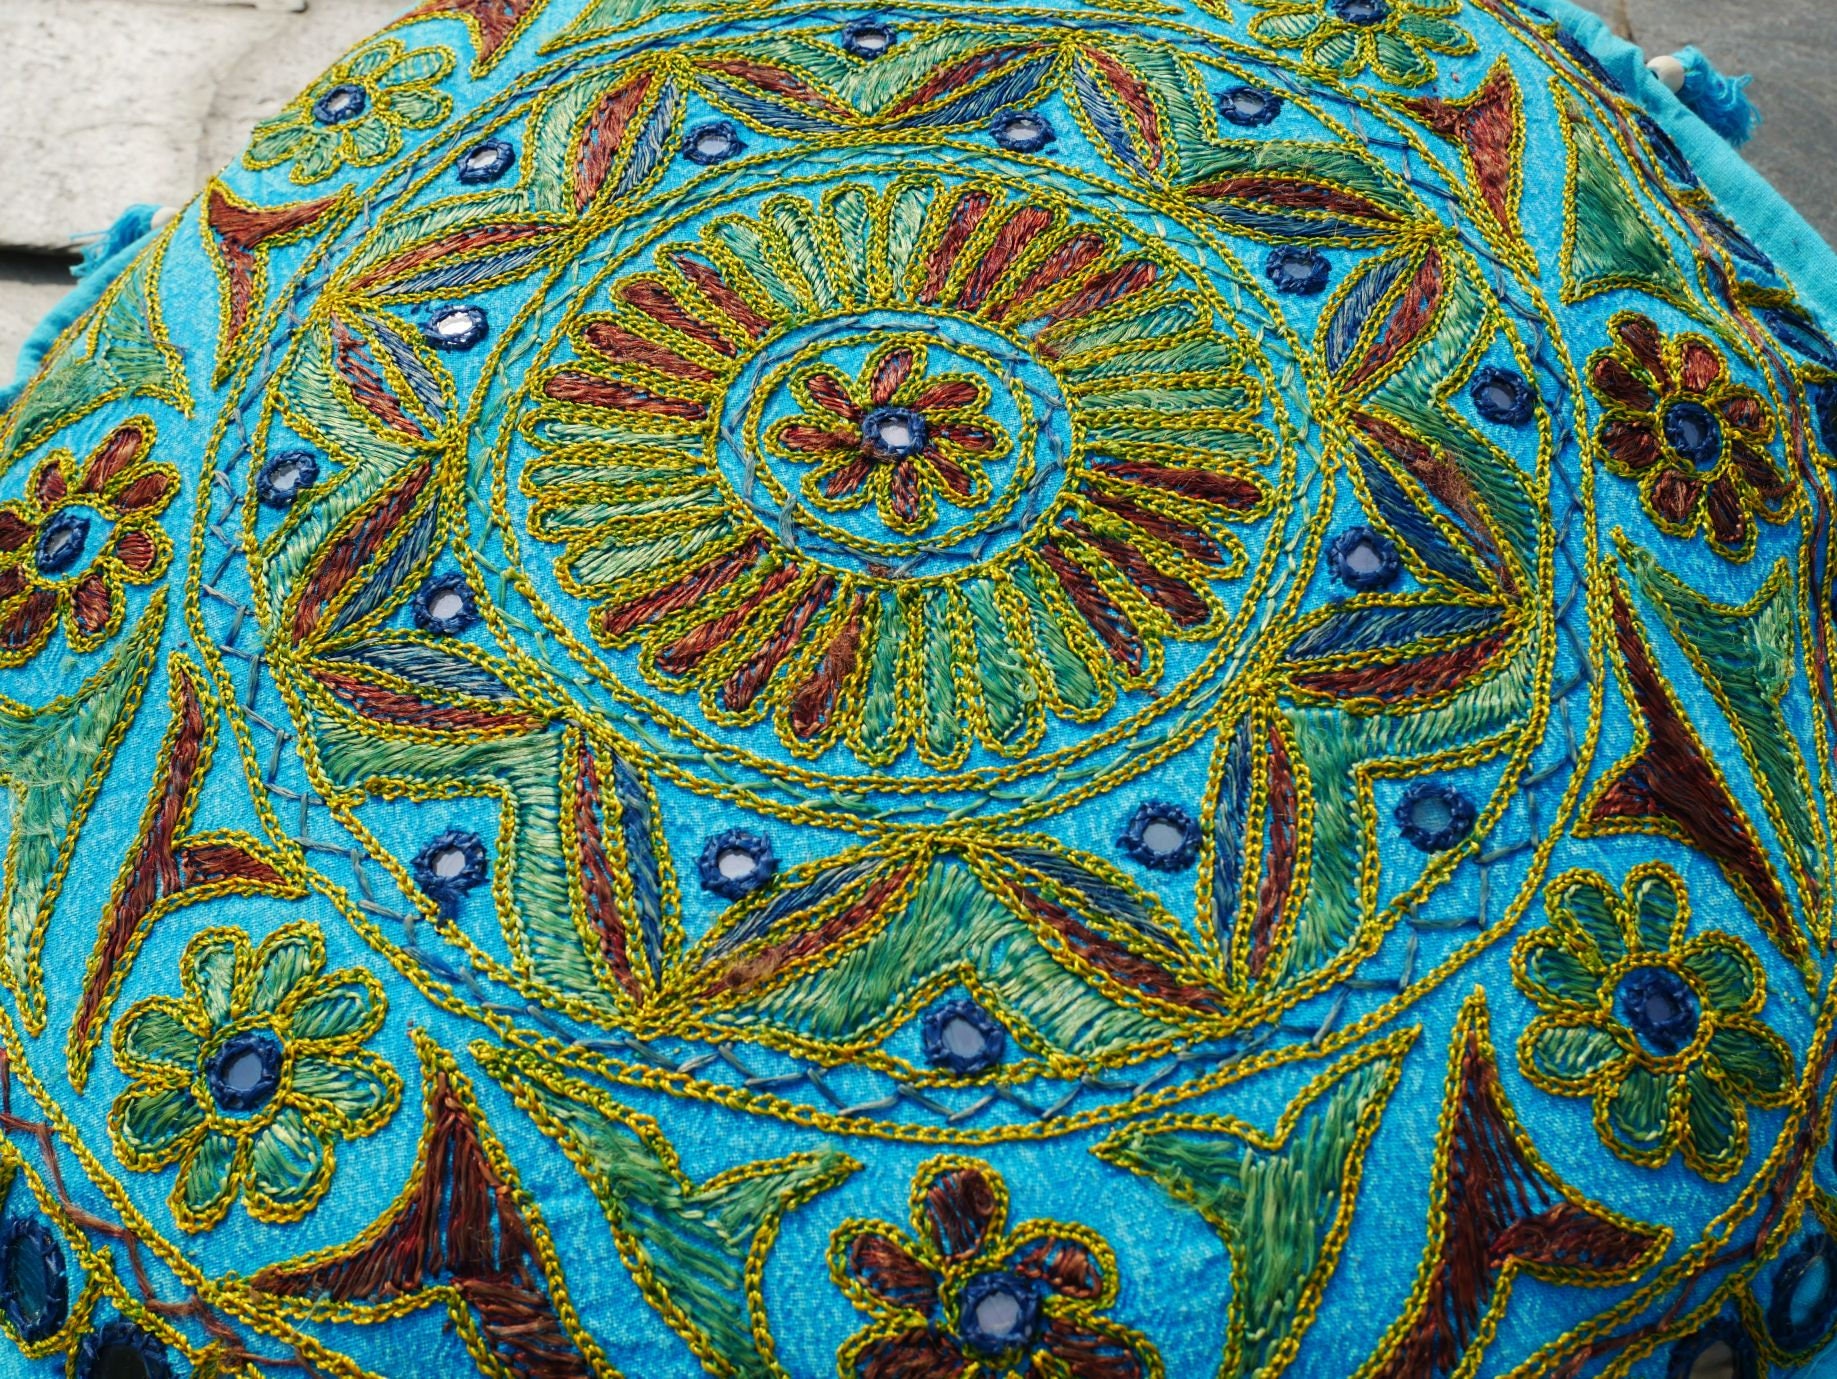 Mandala Meditation Cushion, Boho Meditation Mat, Meditation Pillows for Sitting on Floor, Cushions for Sitting in Home and Outdoor, Round Floor